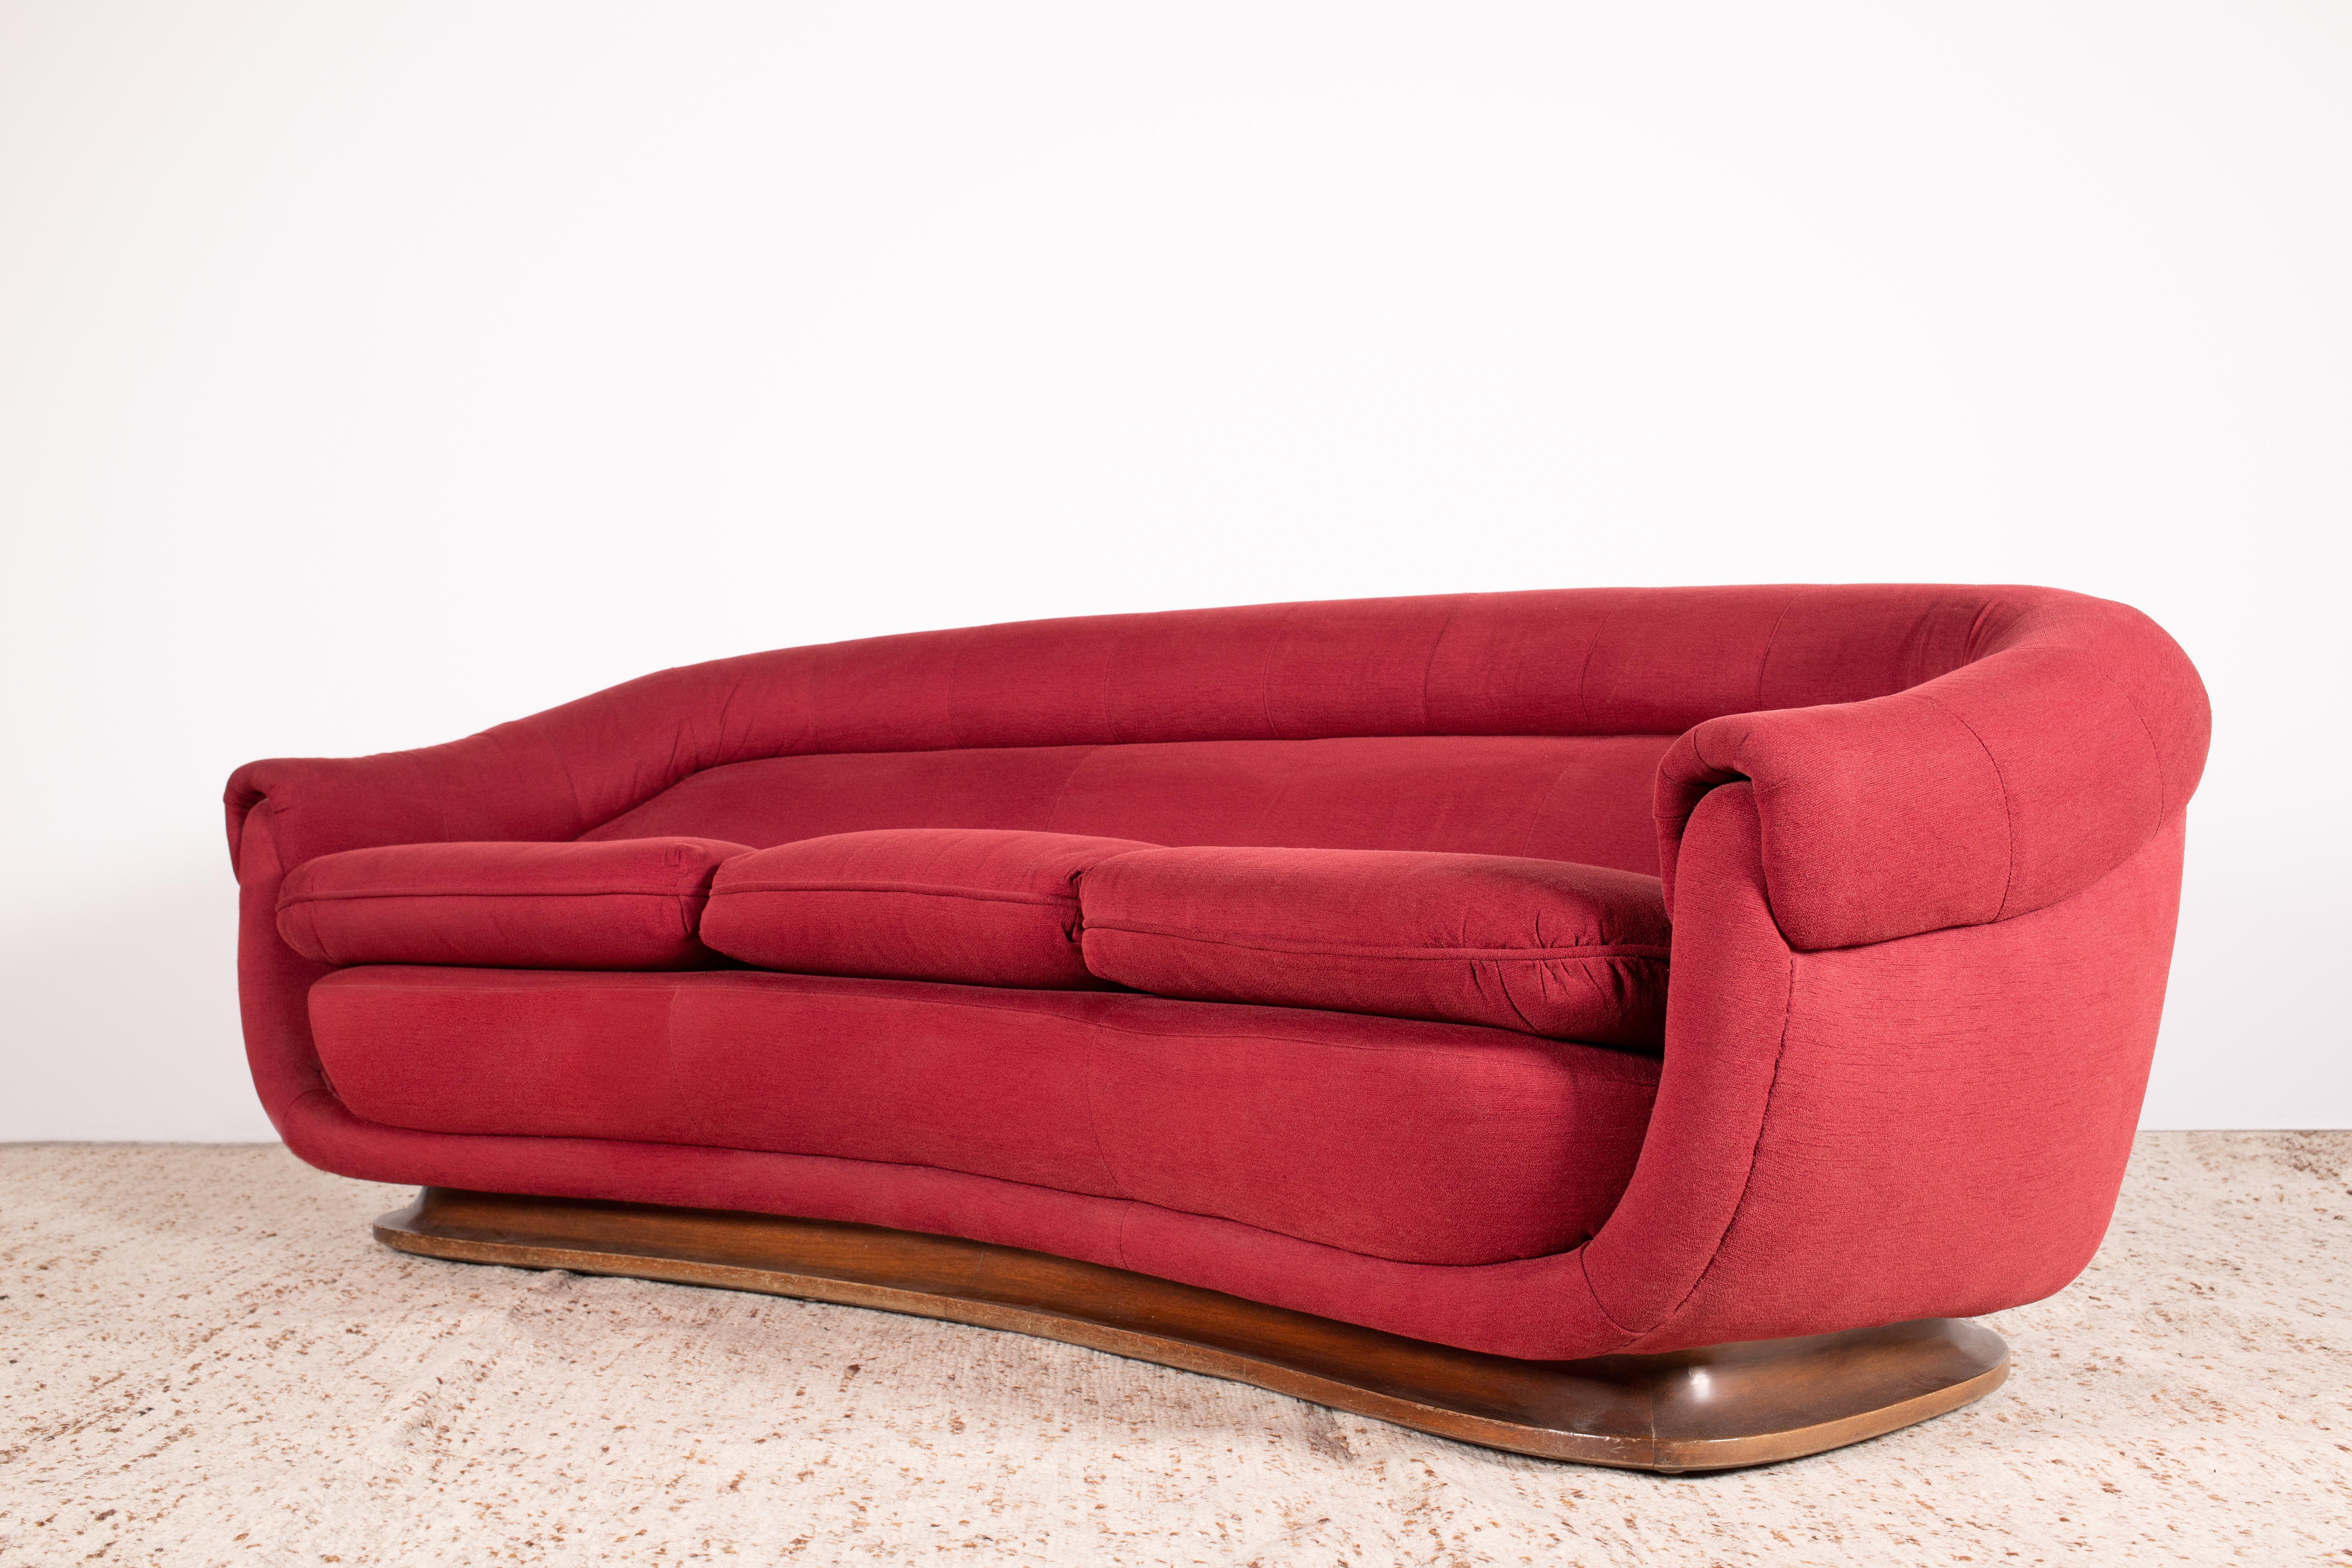 1950s Modern Italian Curved / Crescent 3-Seat Sofa in Red Fabric & Walnut In Good Condition For Sale In Grand Cayman, KY